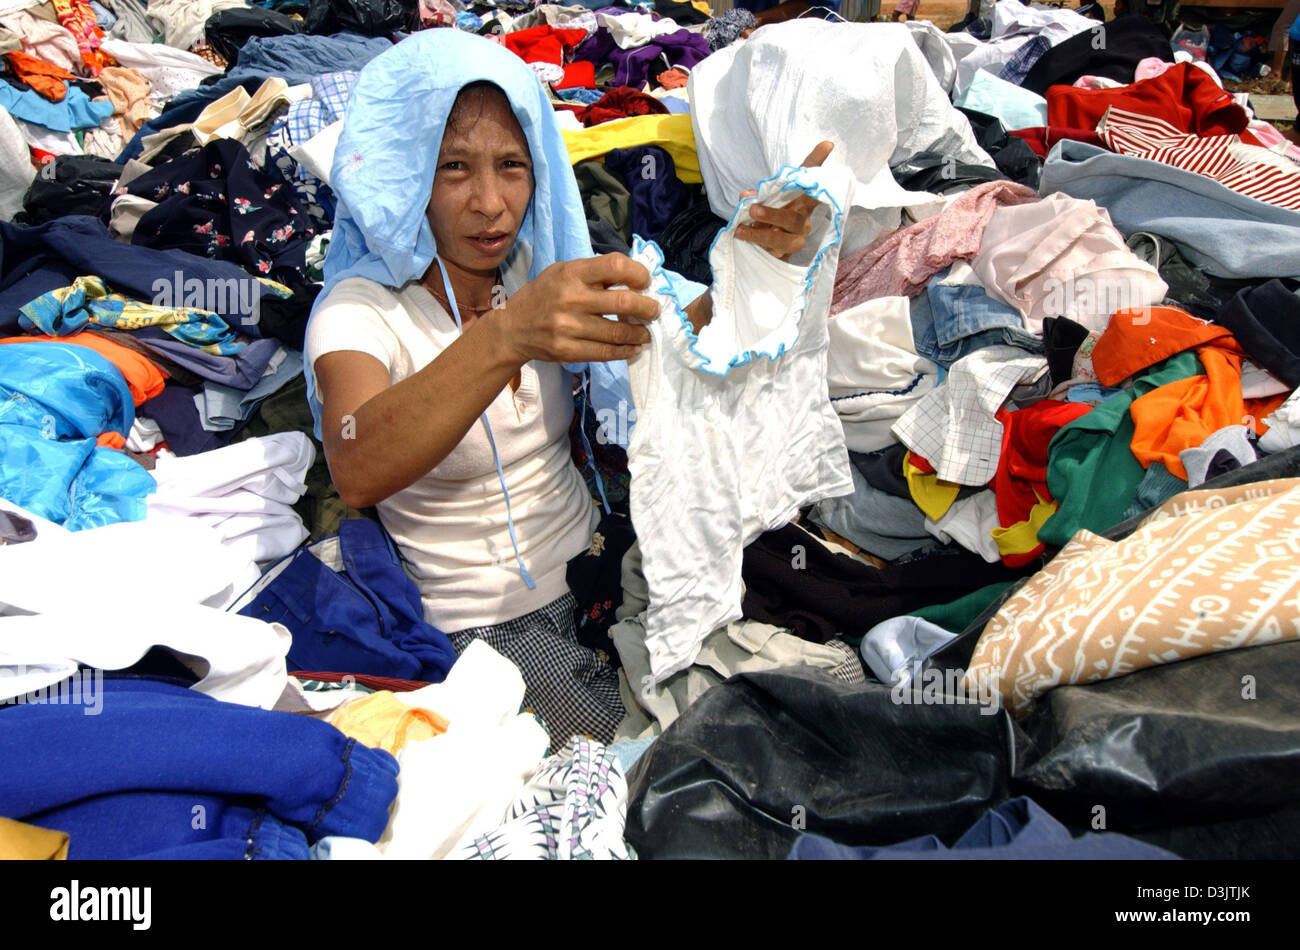 dpa) - A woman tries to find some clothes that fit her in a large